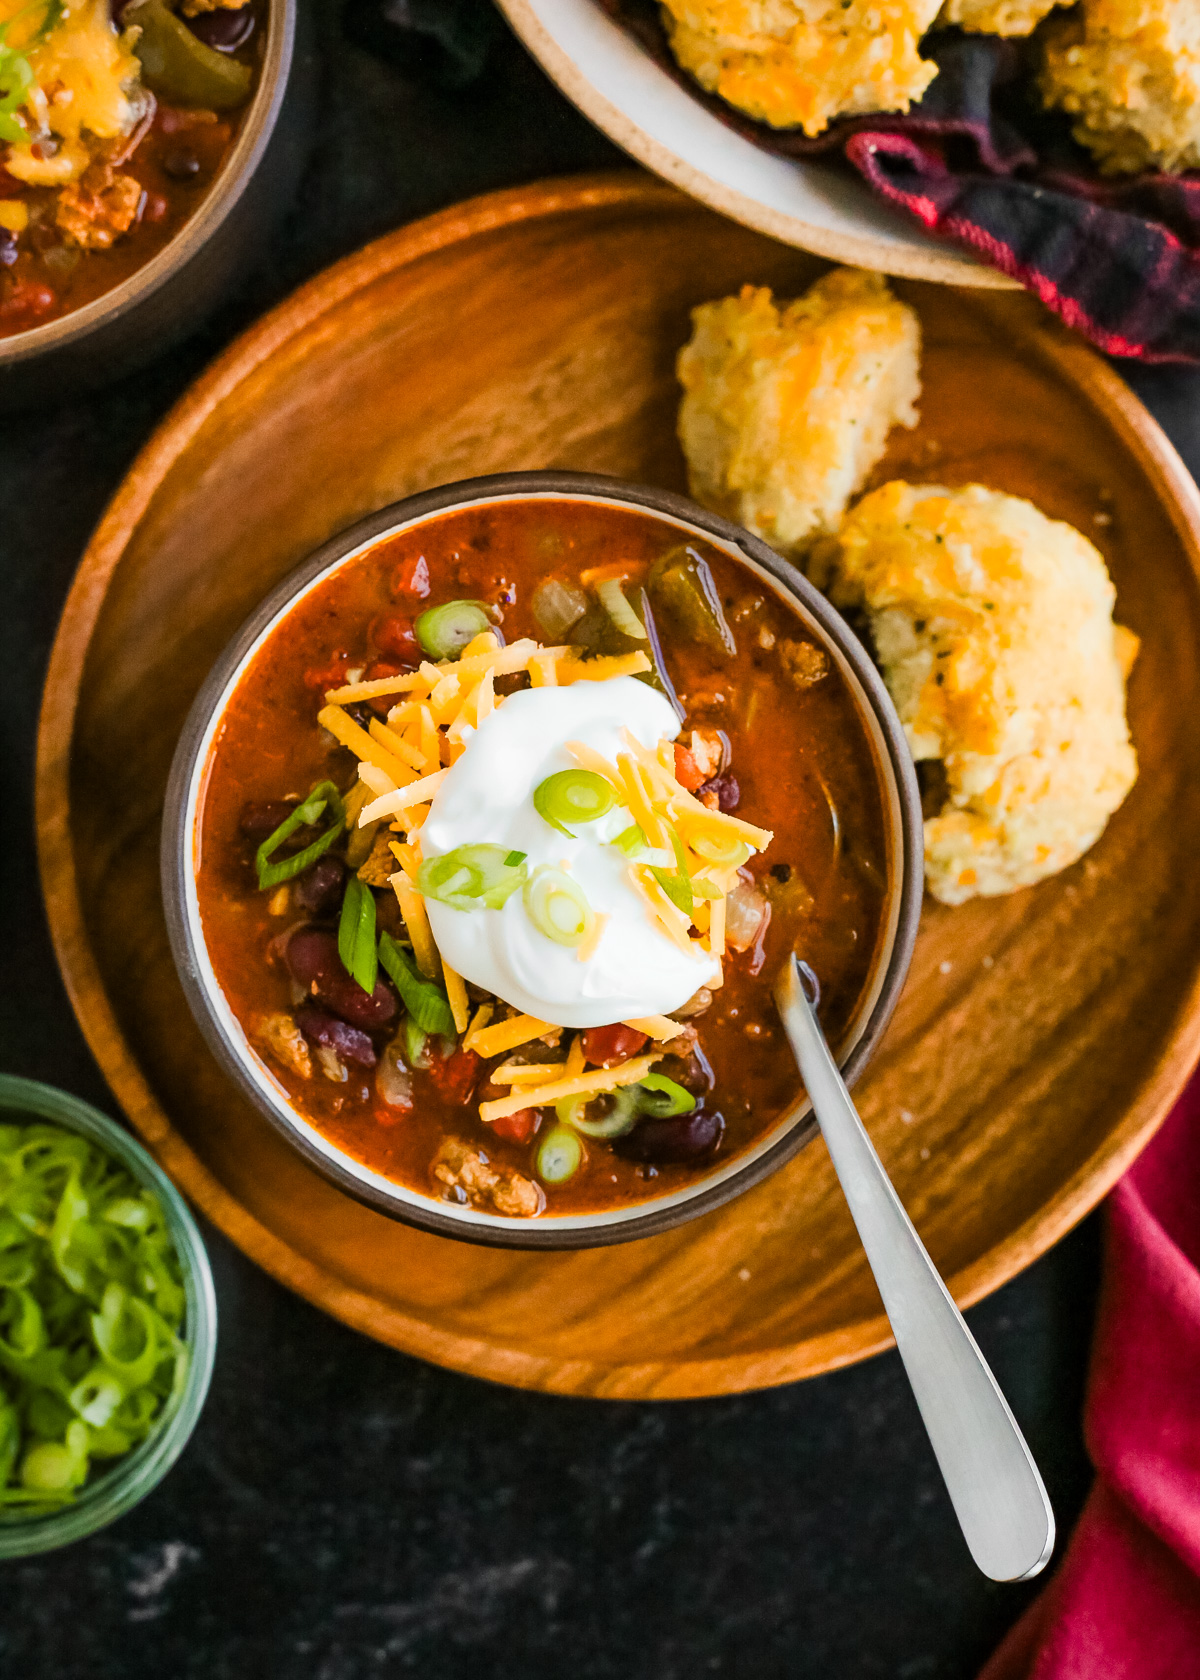 Overhead view of a bowl of lamb chili served on a wooden serving plate, topped with shredded cheddar cheese, a dollop of sour cream, and some sliced green onions with a soup spoon resting in the right side of the bowl